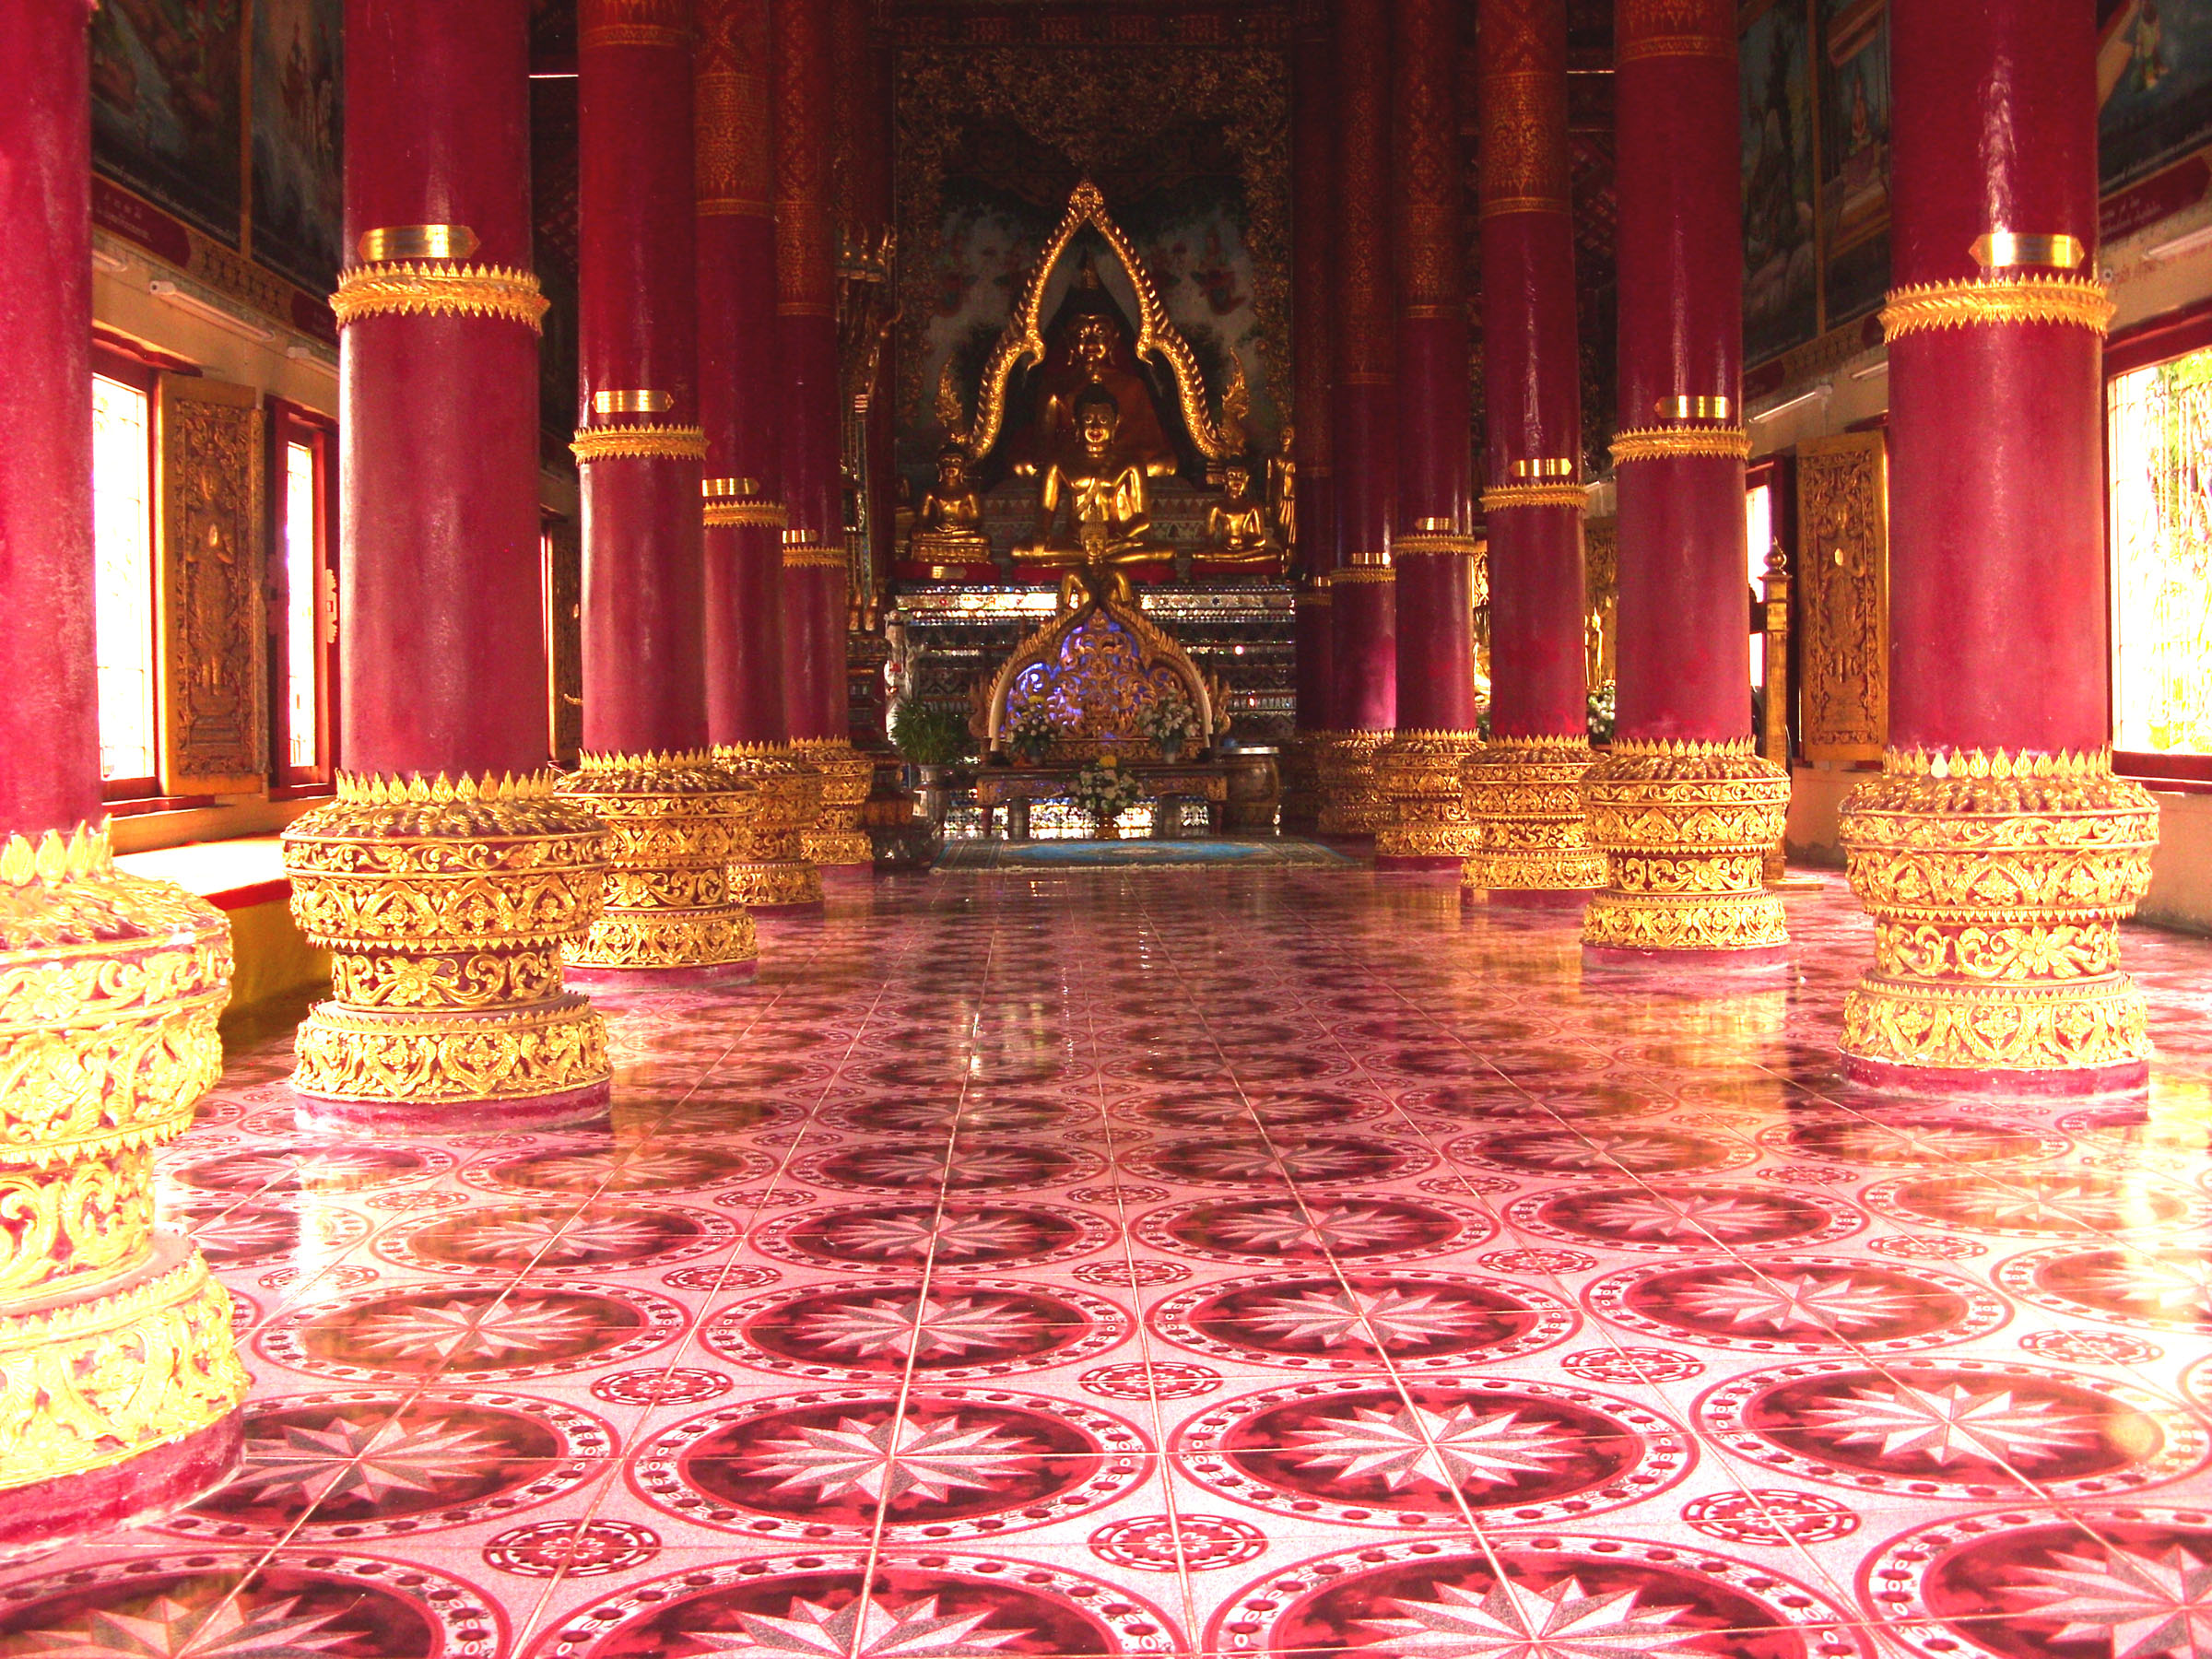  The image shows a large open room with red pillars and a golden Buddha statue at the end of the room.